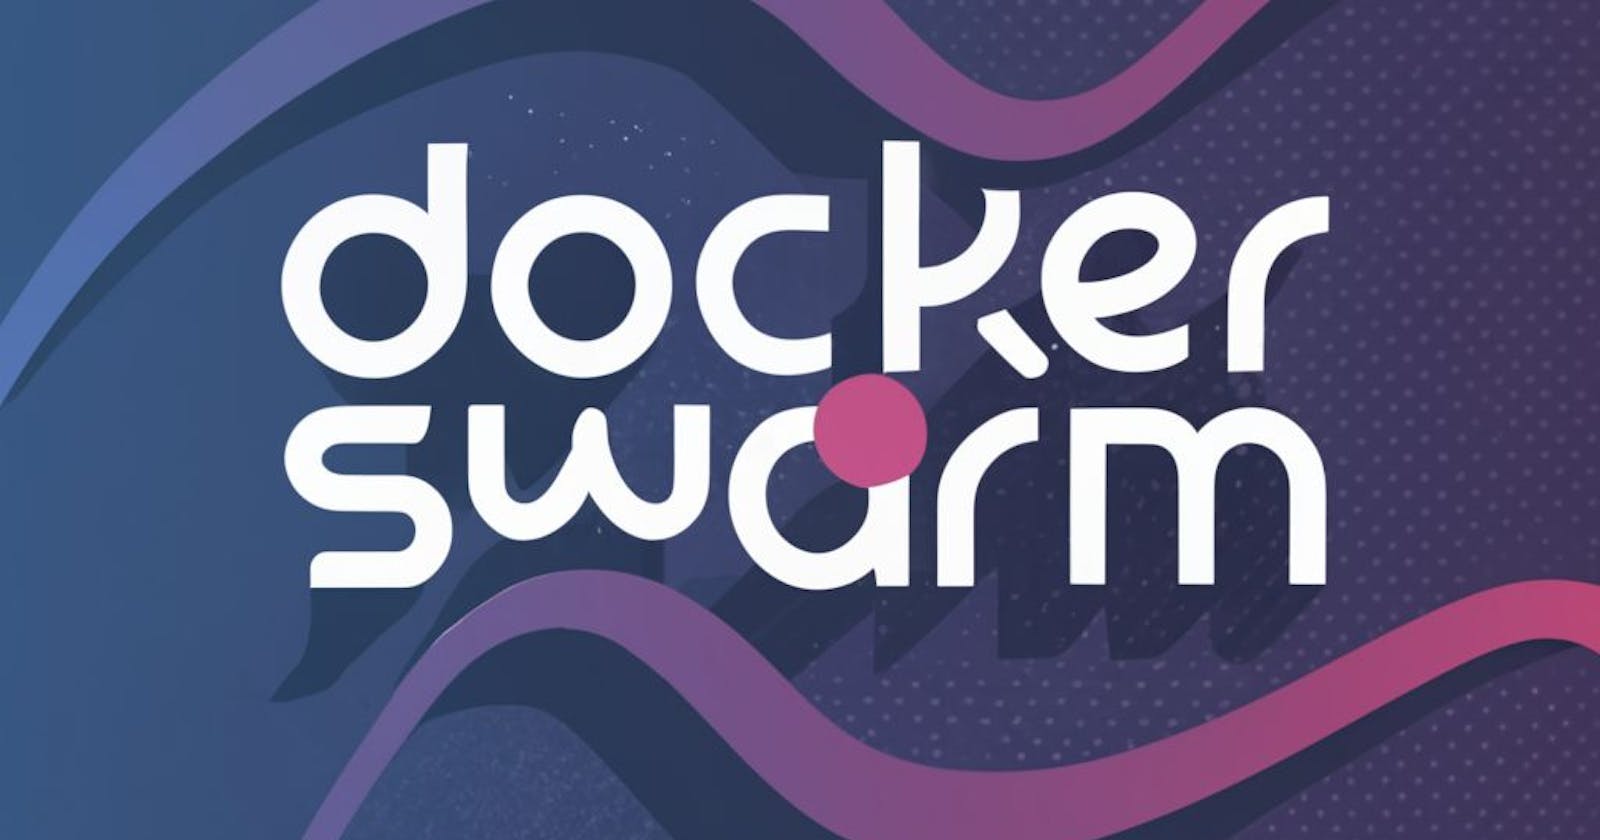 What are the constraints in the context of service placement in Docker Swarm?